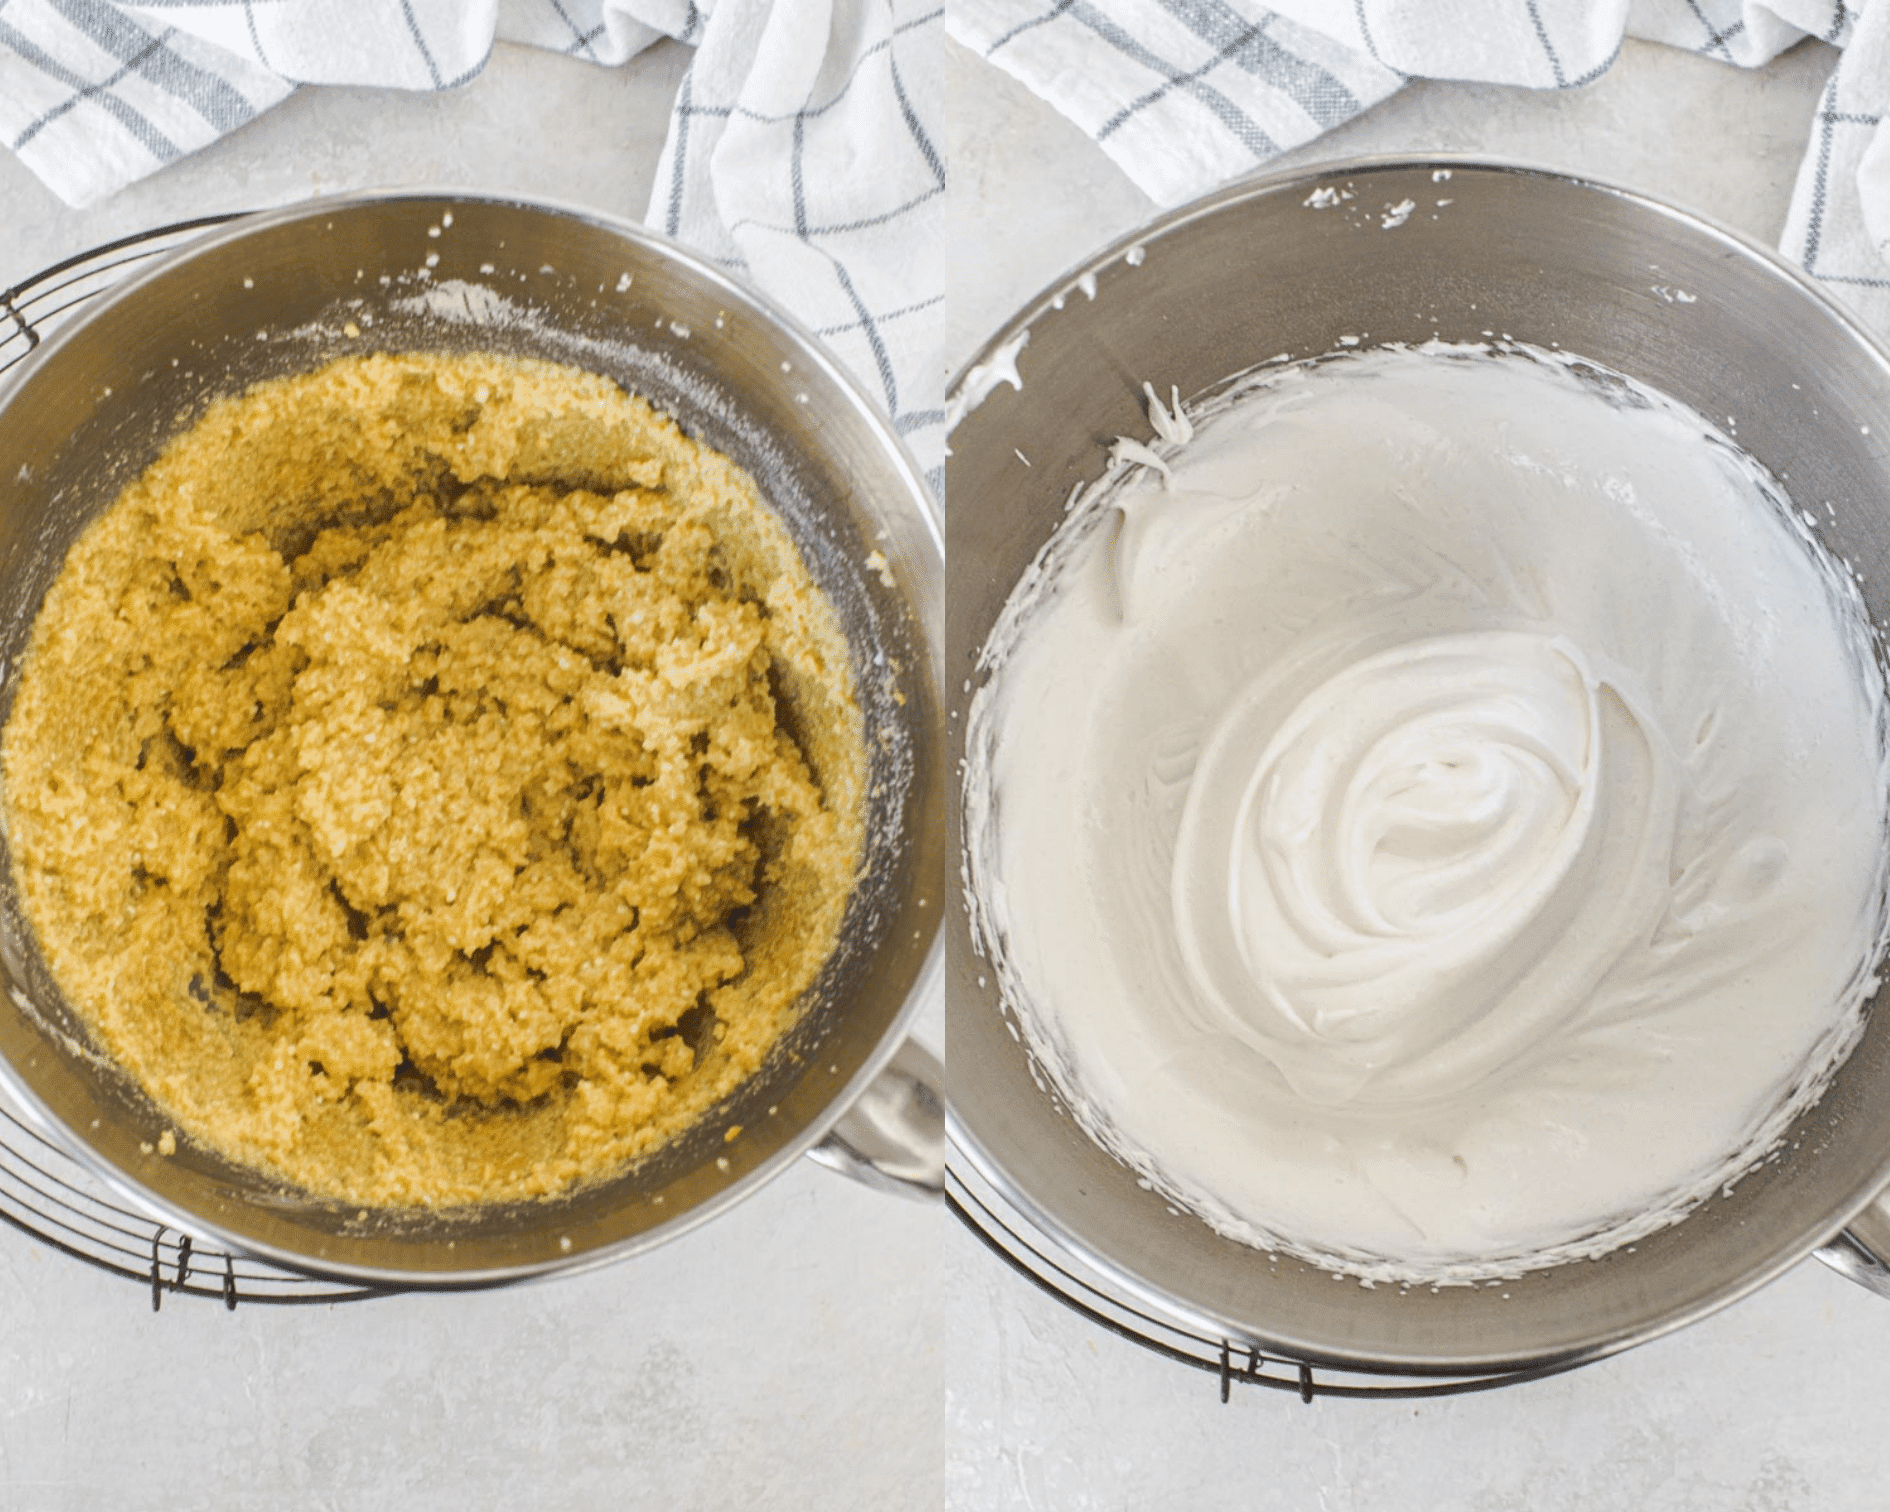 Almond Meal mixture in a mixing bowl on left and beaten egg whites in a mixing bowl on right.